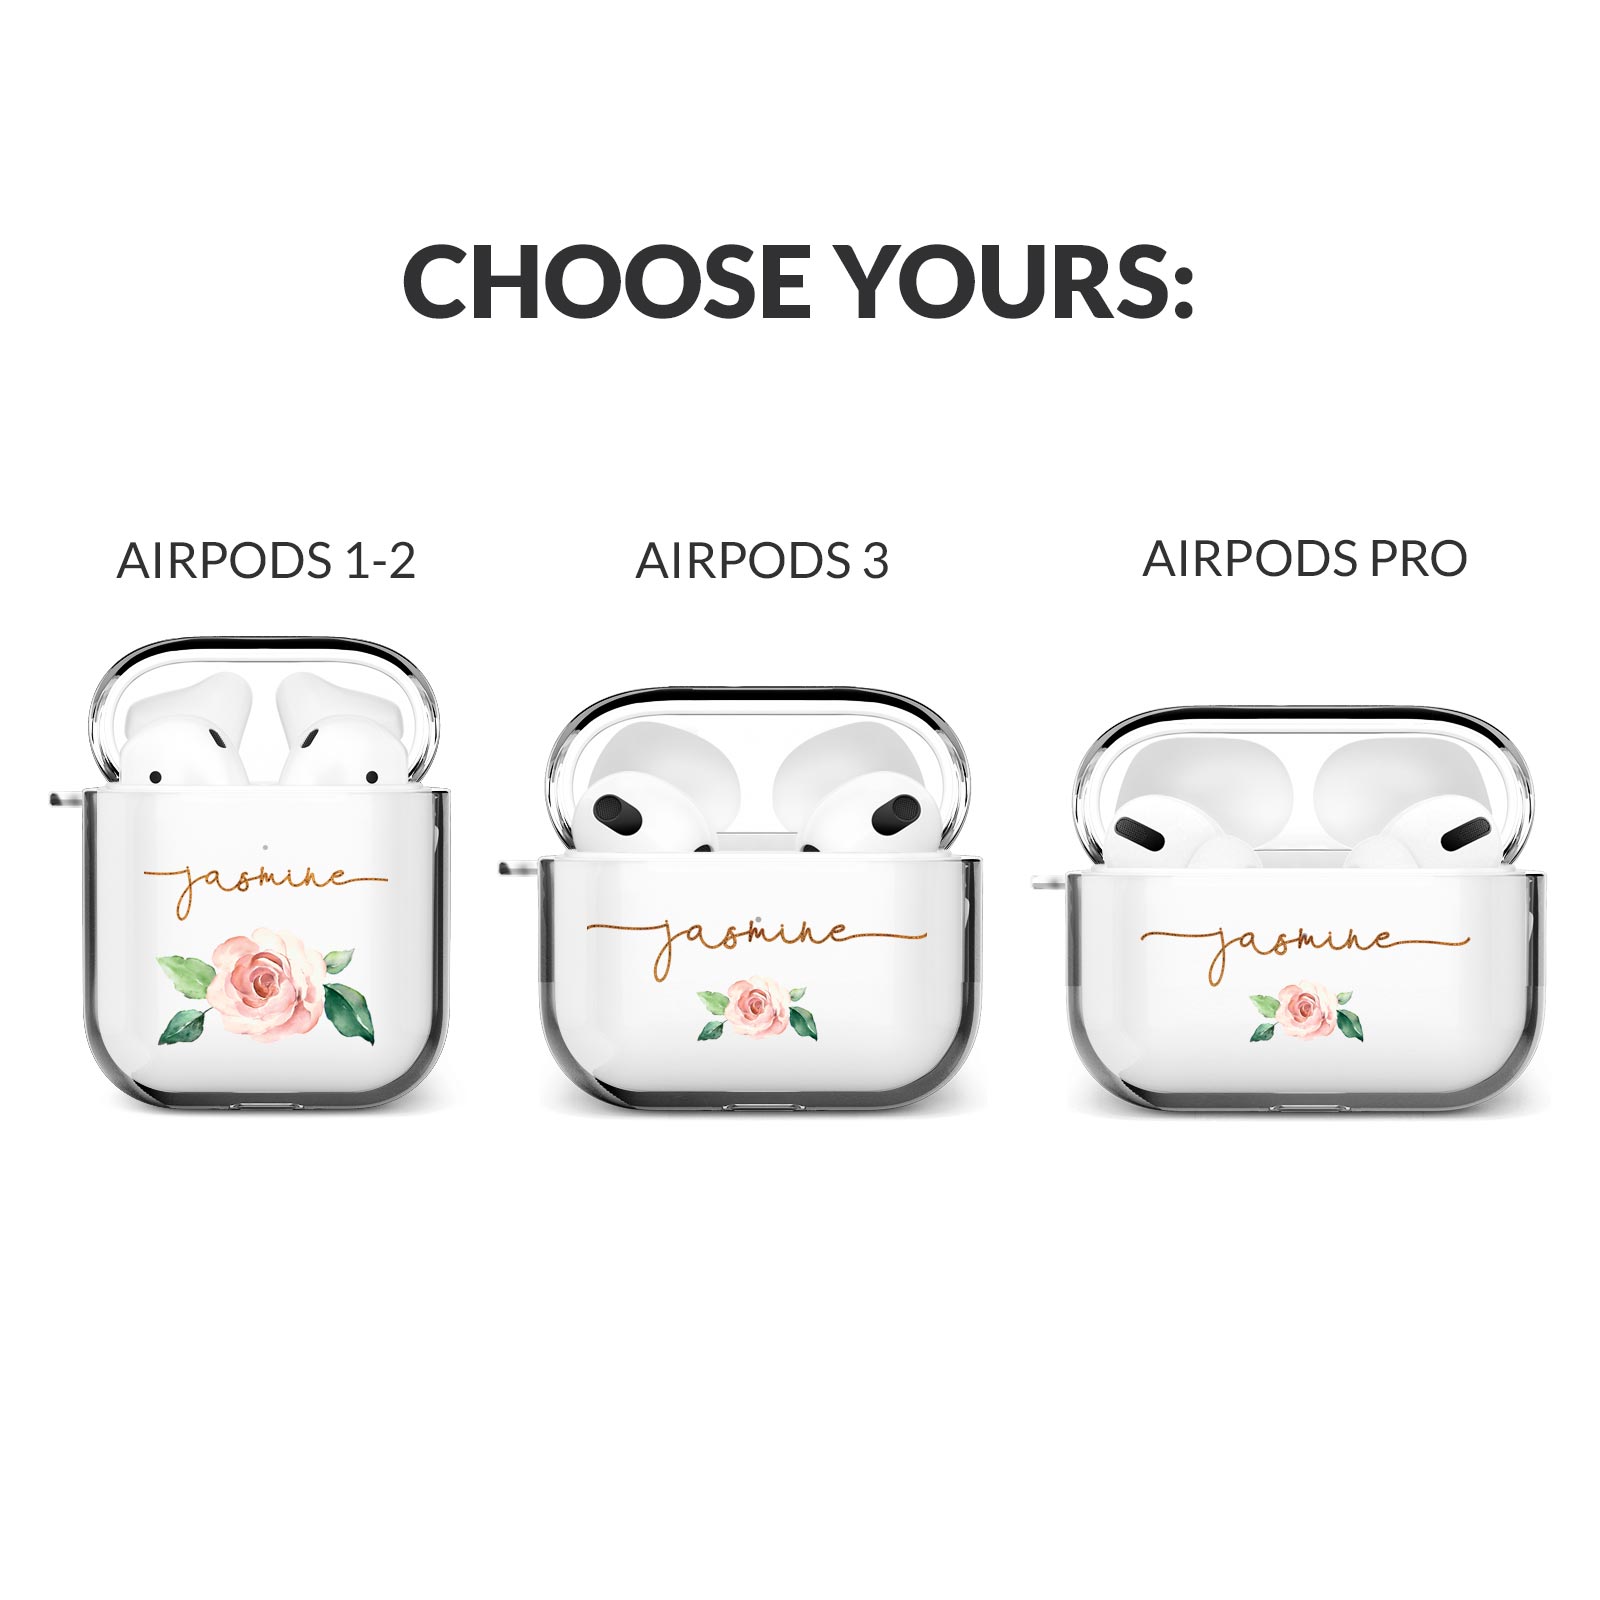 Designer Fashion Airpod 1 2 Case / Cover With Belt Buckle